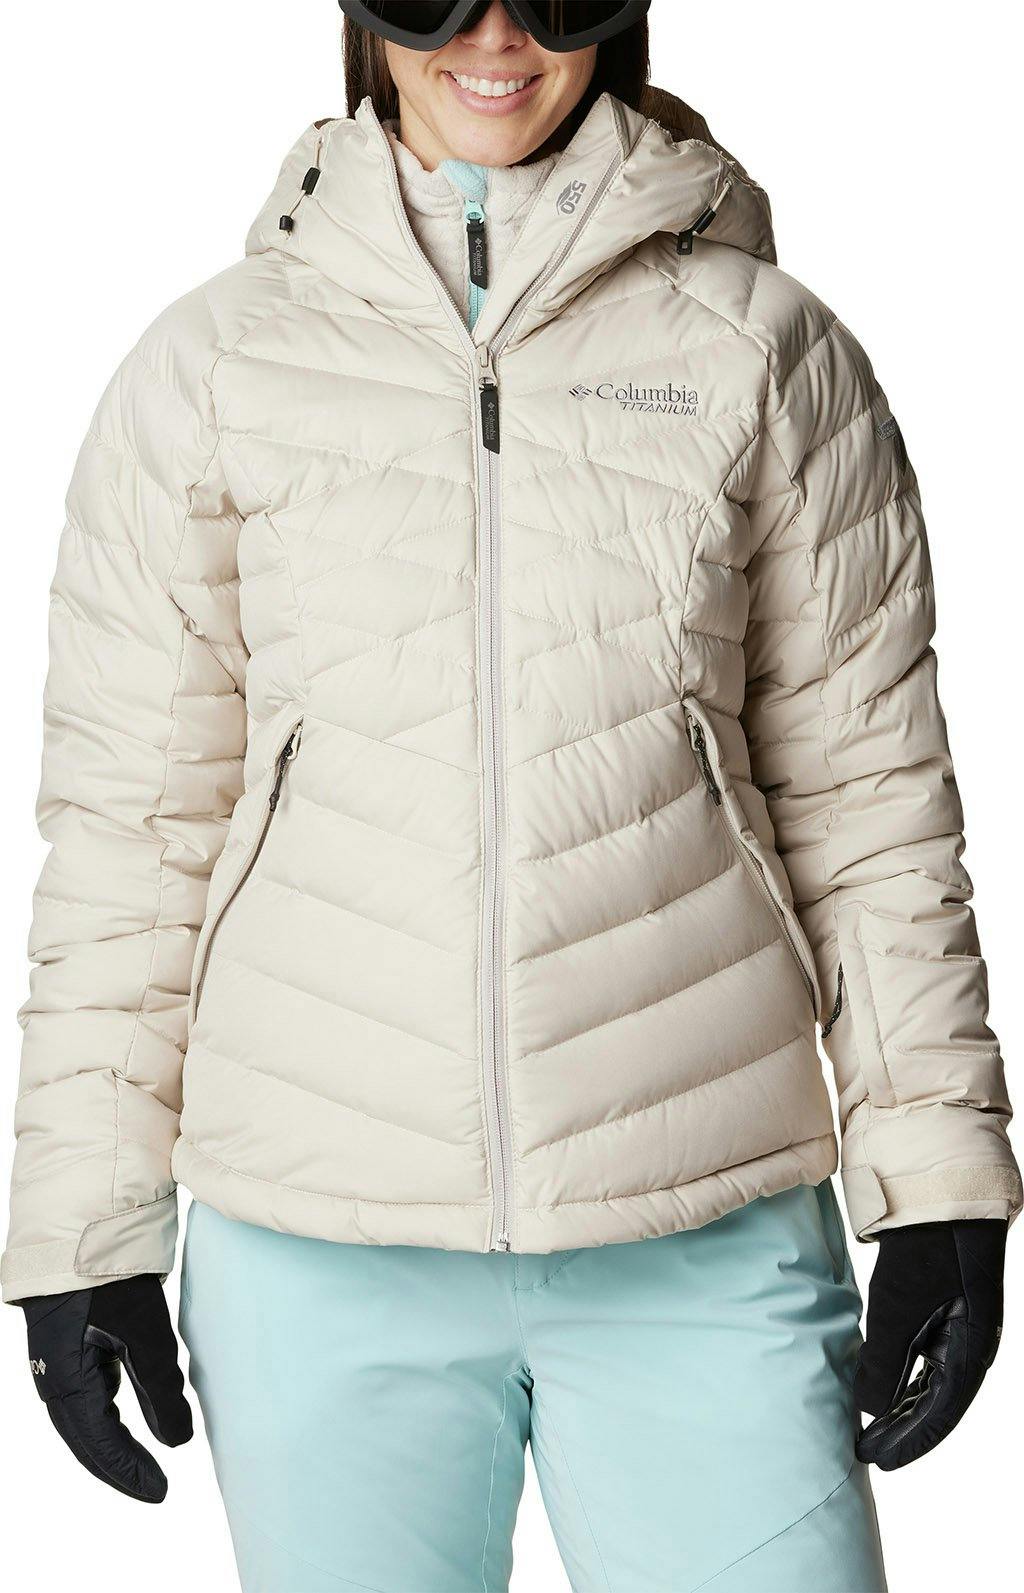 Product image for Roaring Fork Down Jacket - Women's